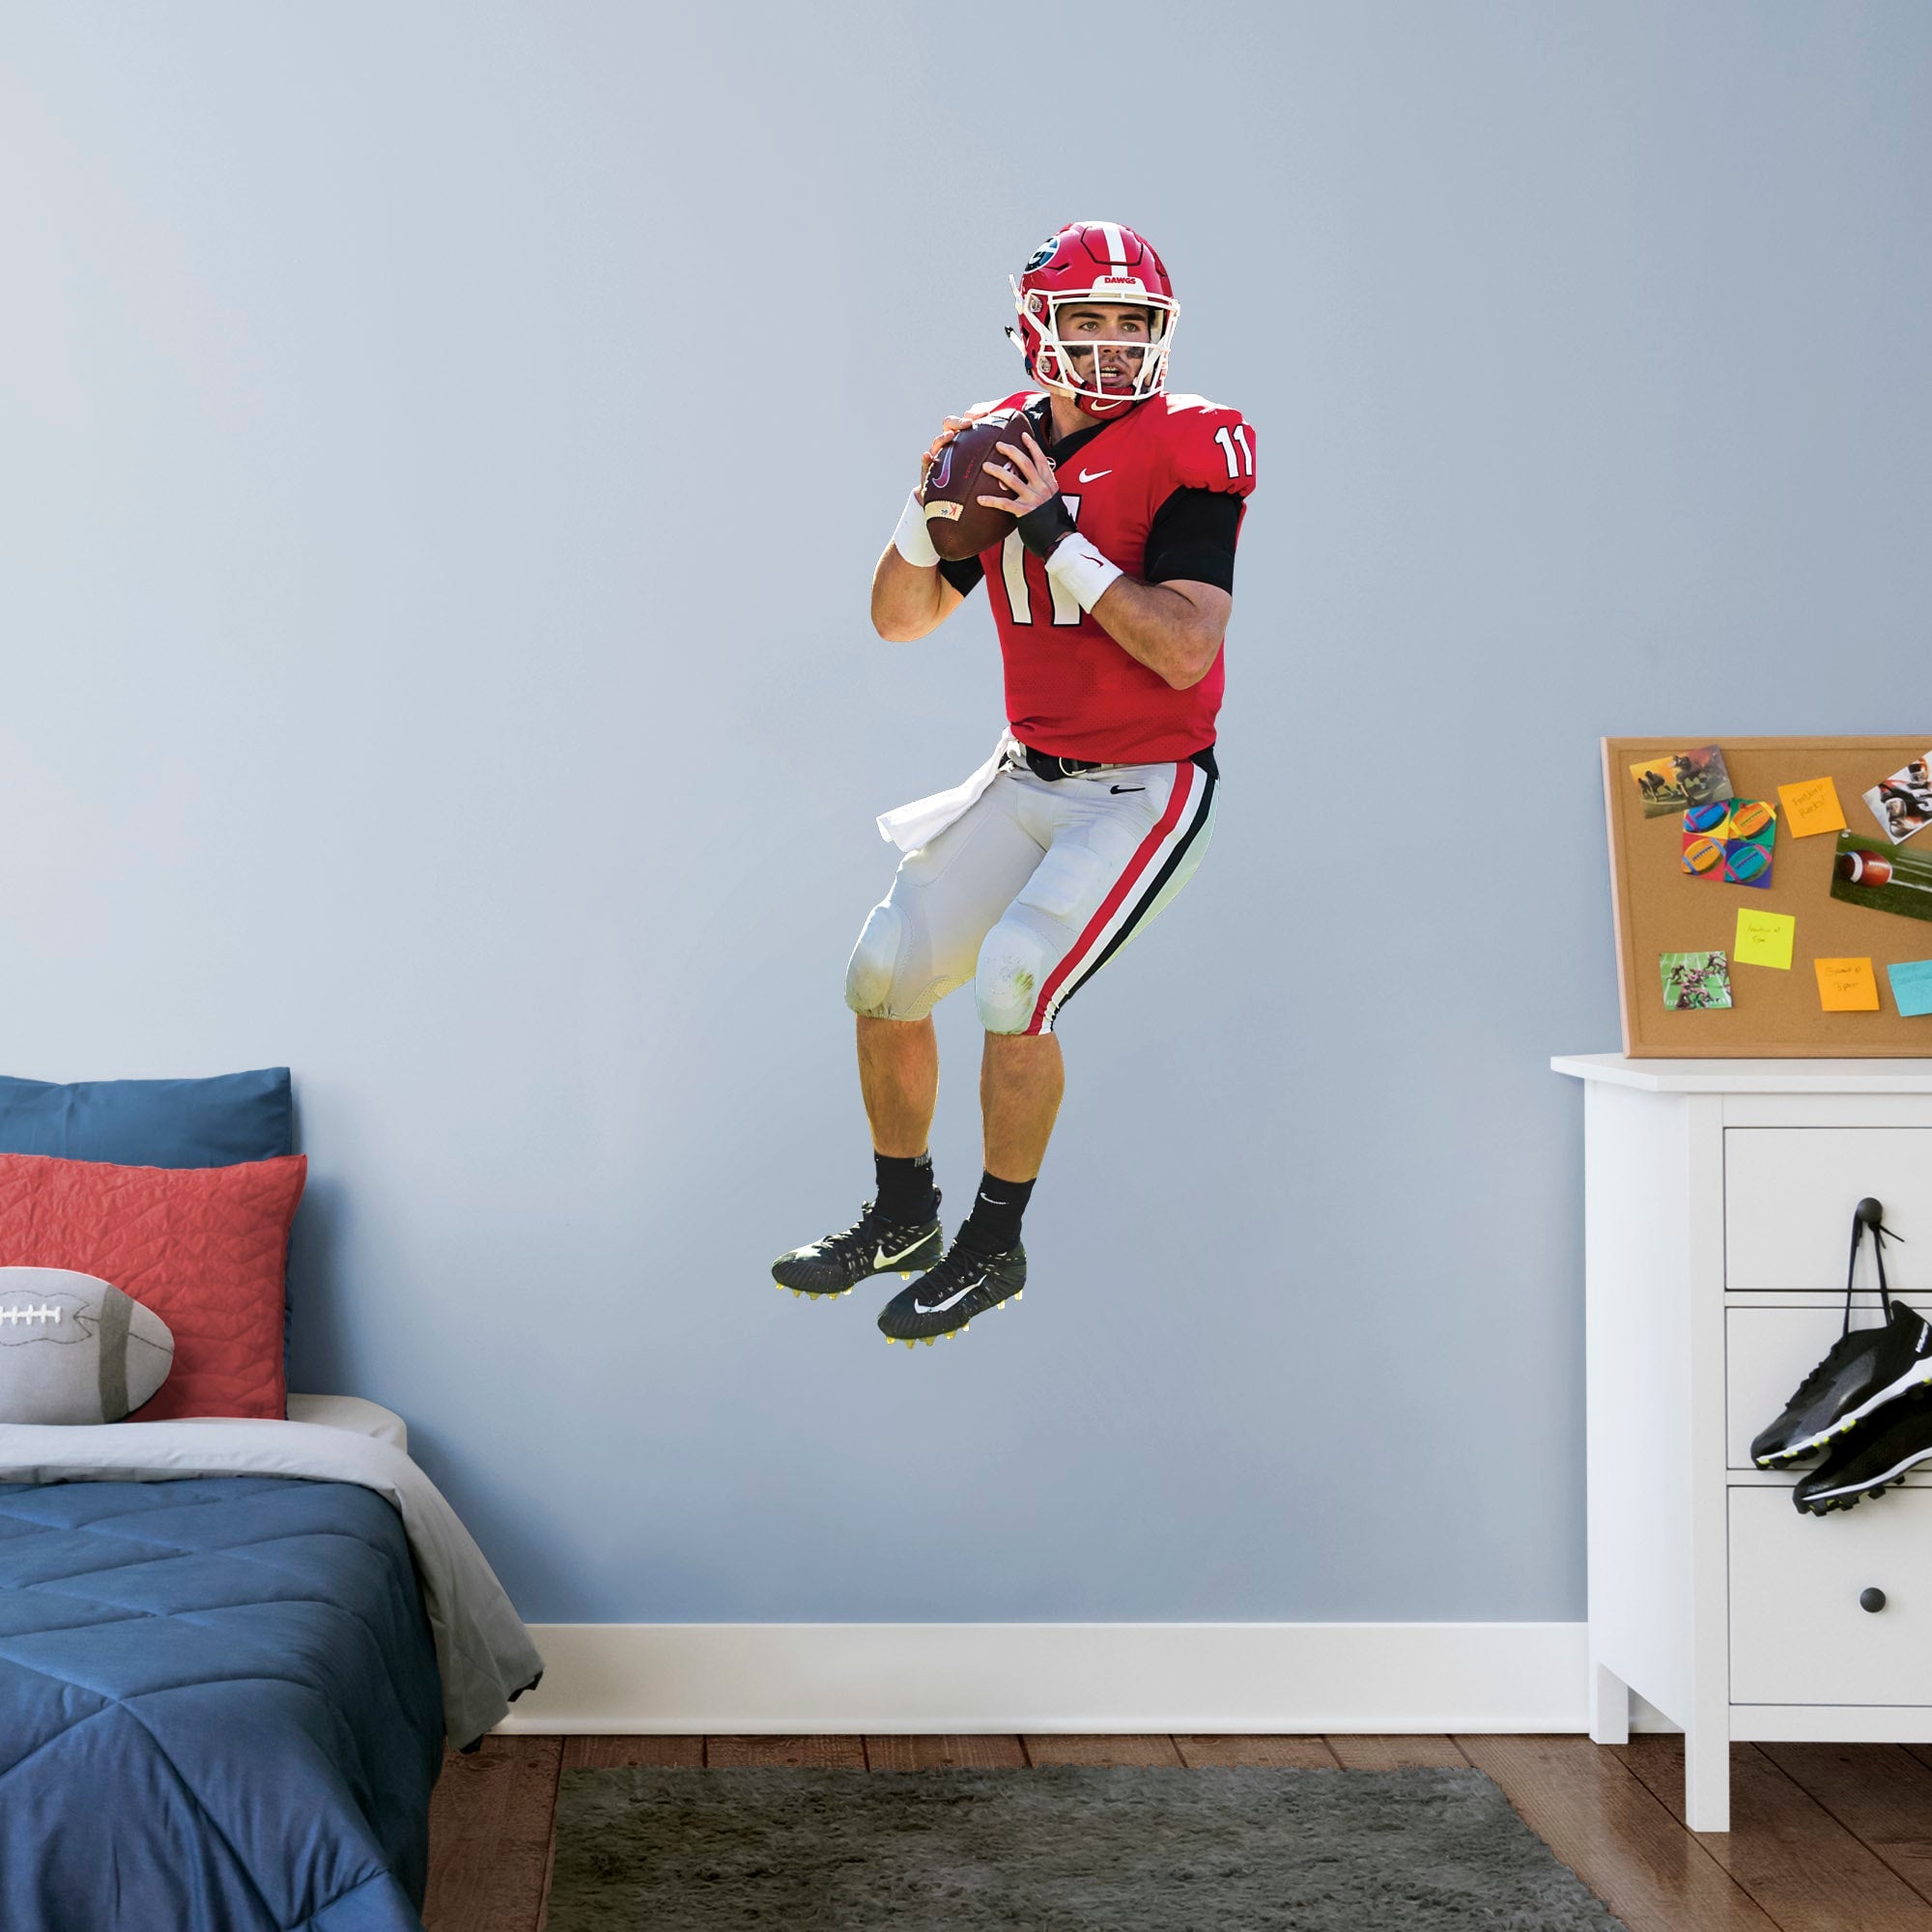 Jake Fromm for Georgia Bulldogs: Georgia - Officially Licensed Removable Wall Decal Giant Athlete + 2 Decals (22"W x 51"H) by Fa